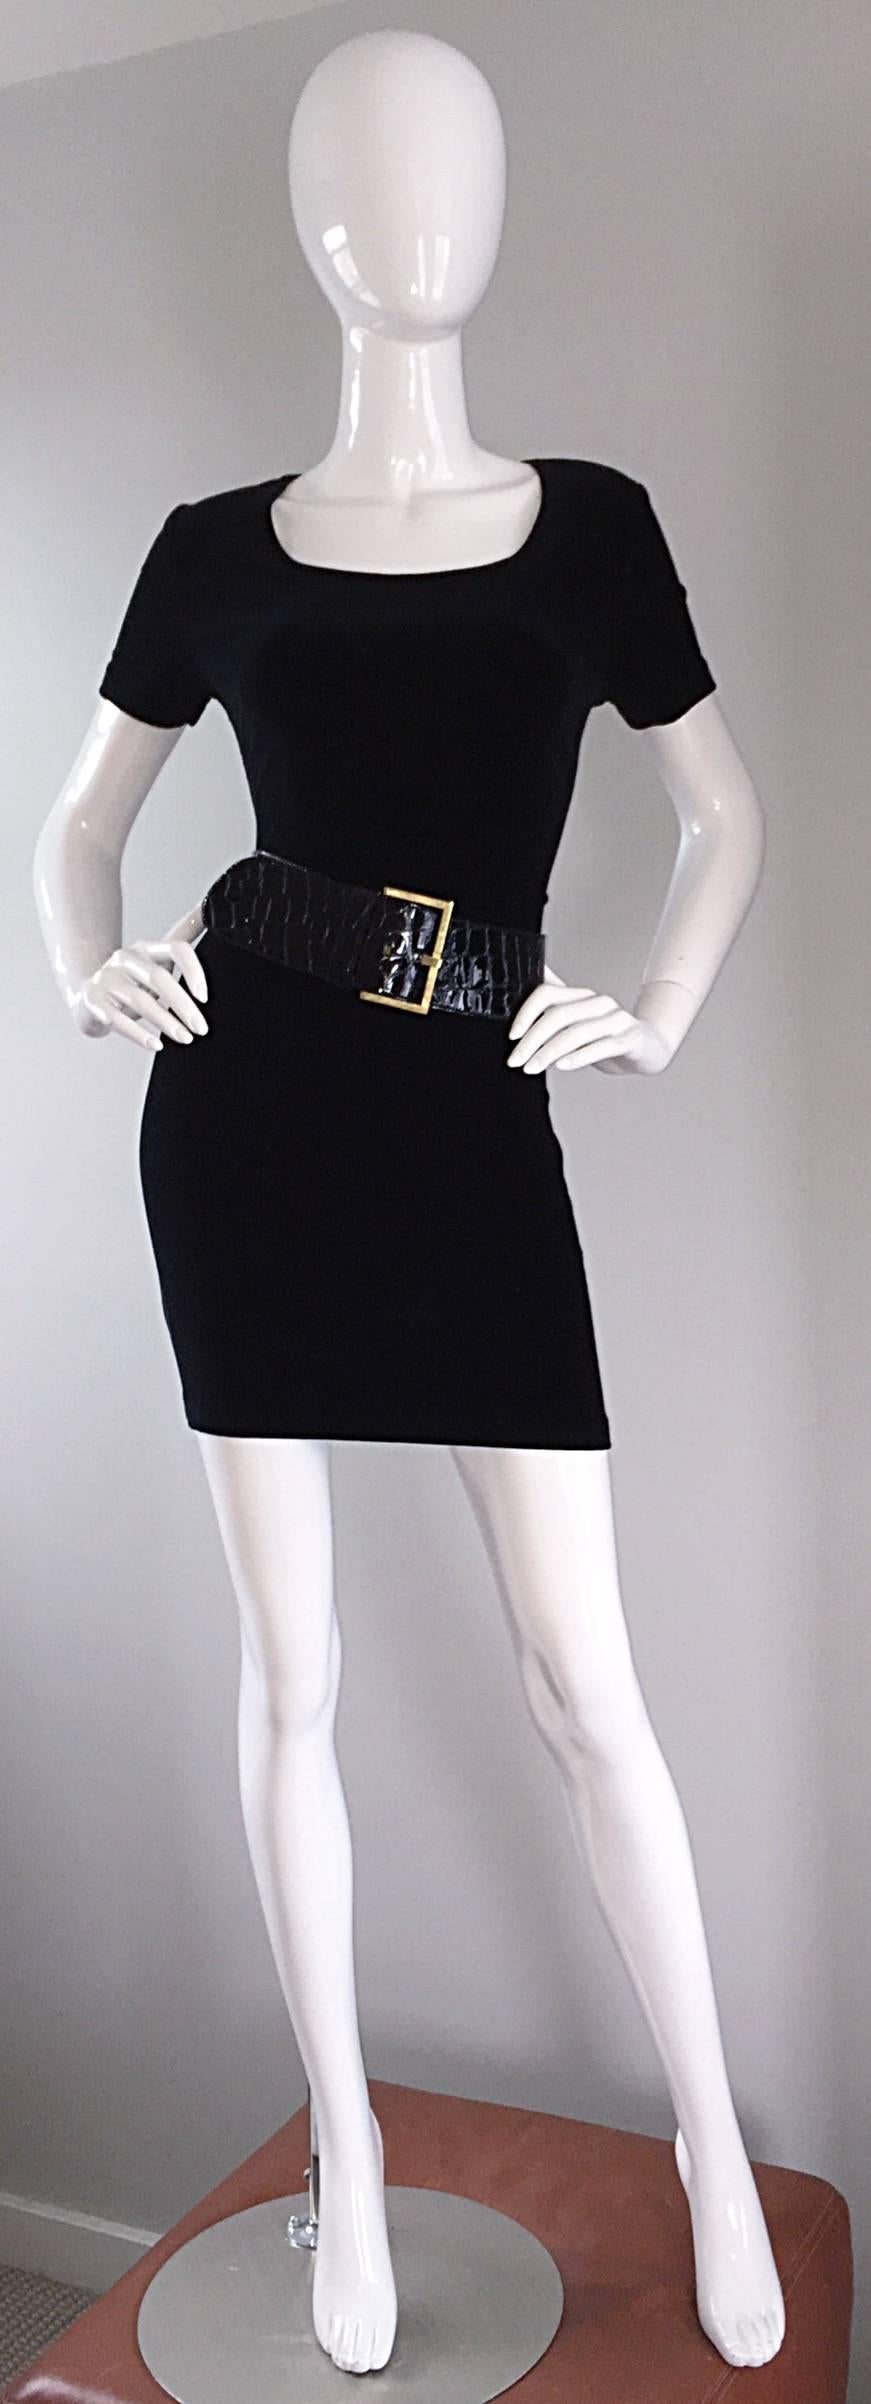 Brand new vintage Jane August gator embossed black patent leather belt! Substantial width, that makes just the right statement. Oversized square gold buckle. The perfect black belt for jeans, a skirt, or over your favorite little black dress. The